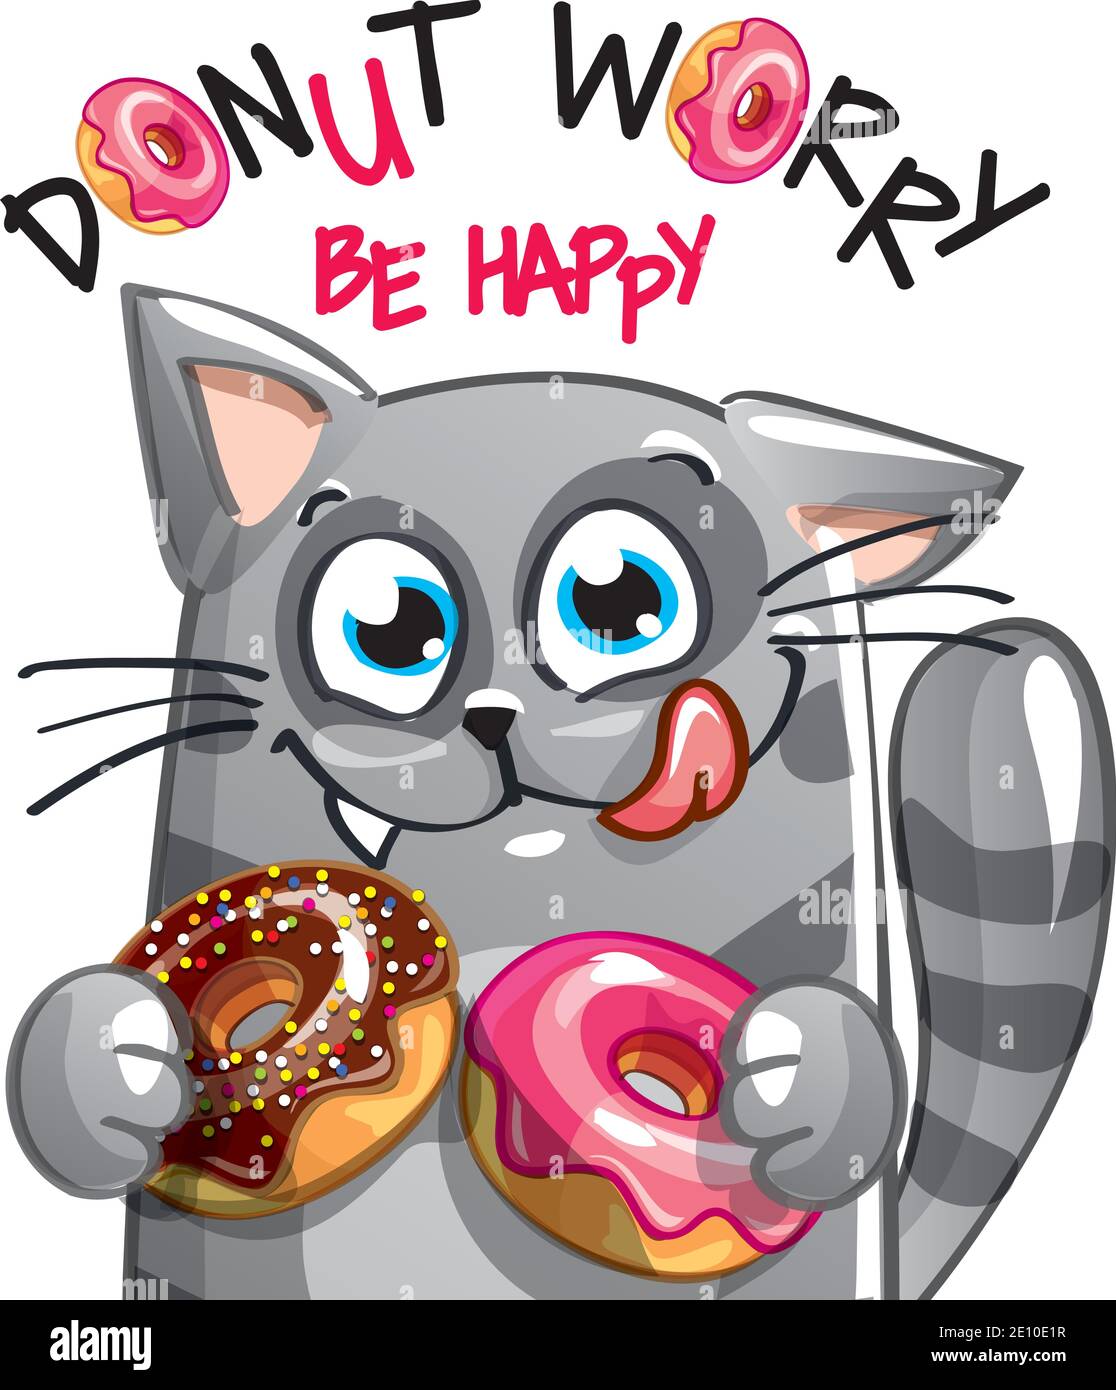 Vector illustration of cartoon cat with donuts. Stock Vector